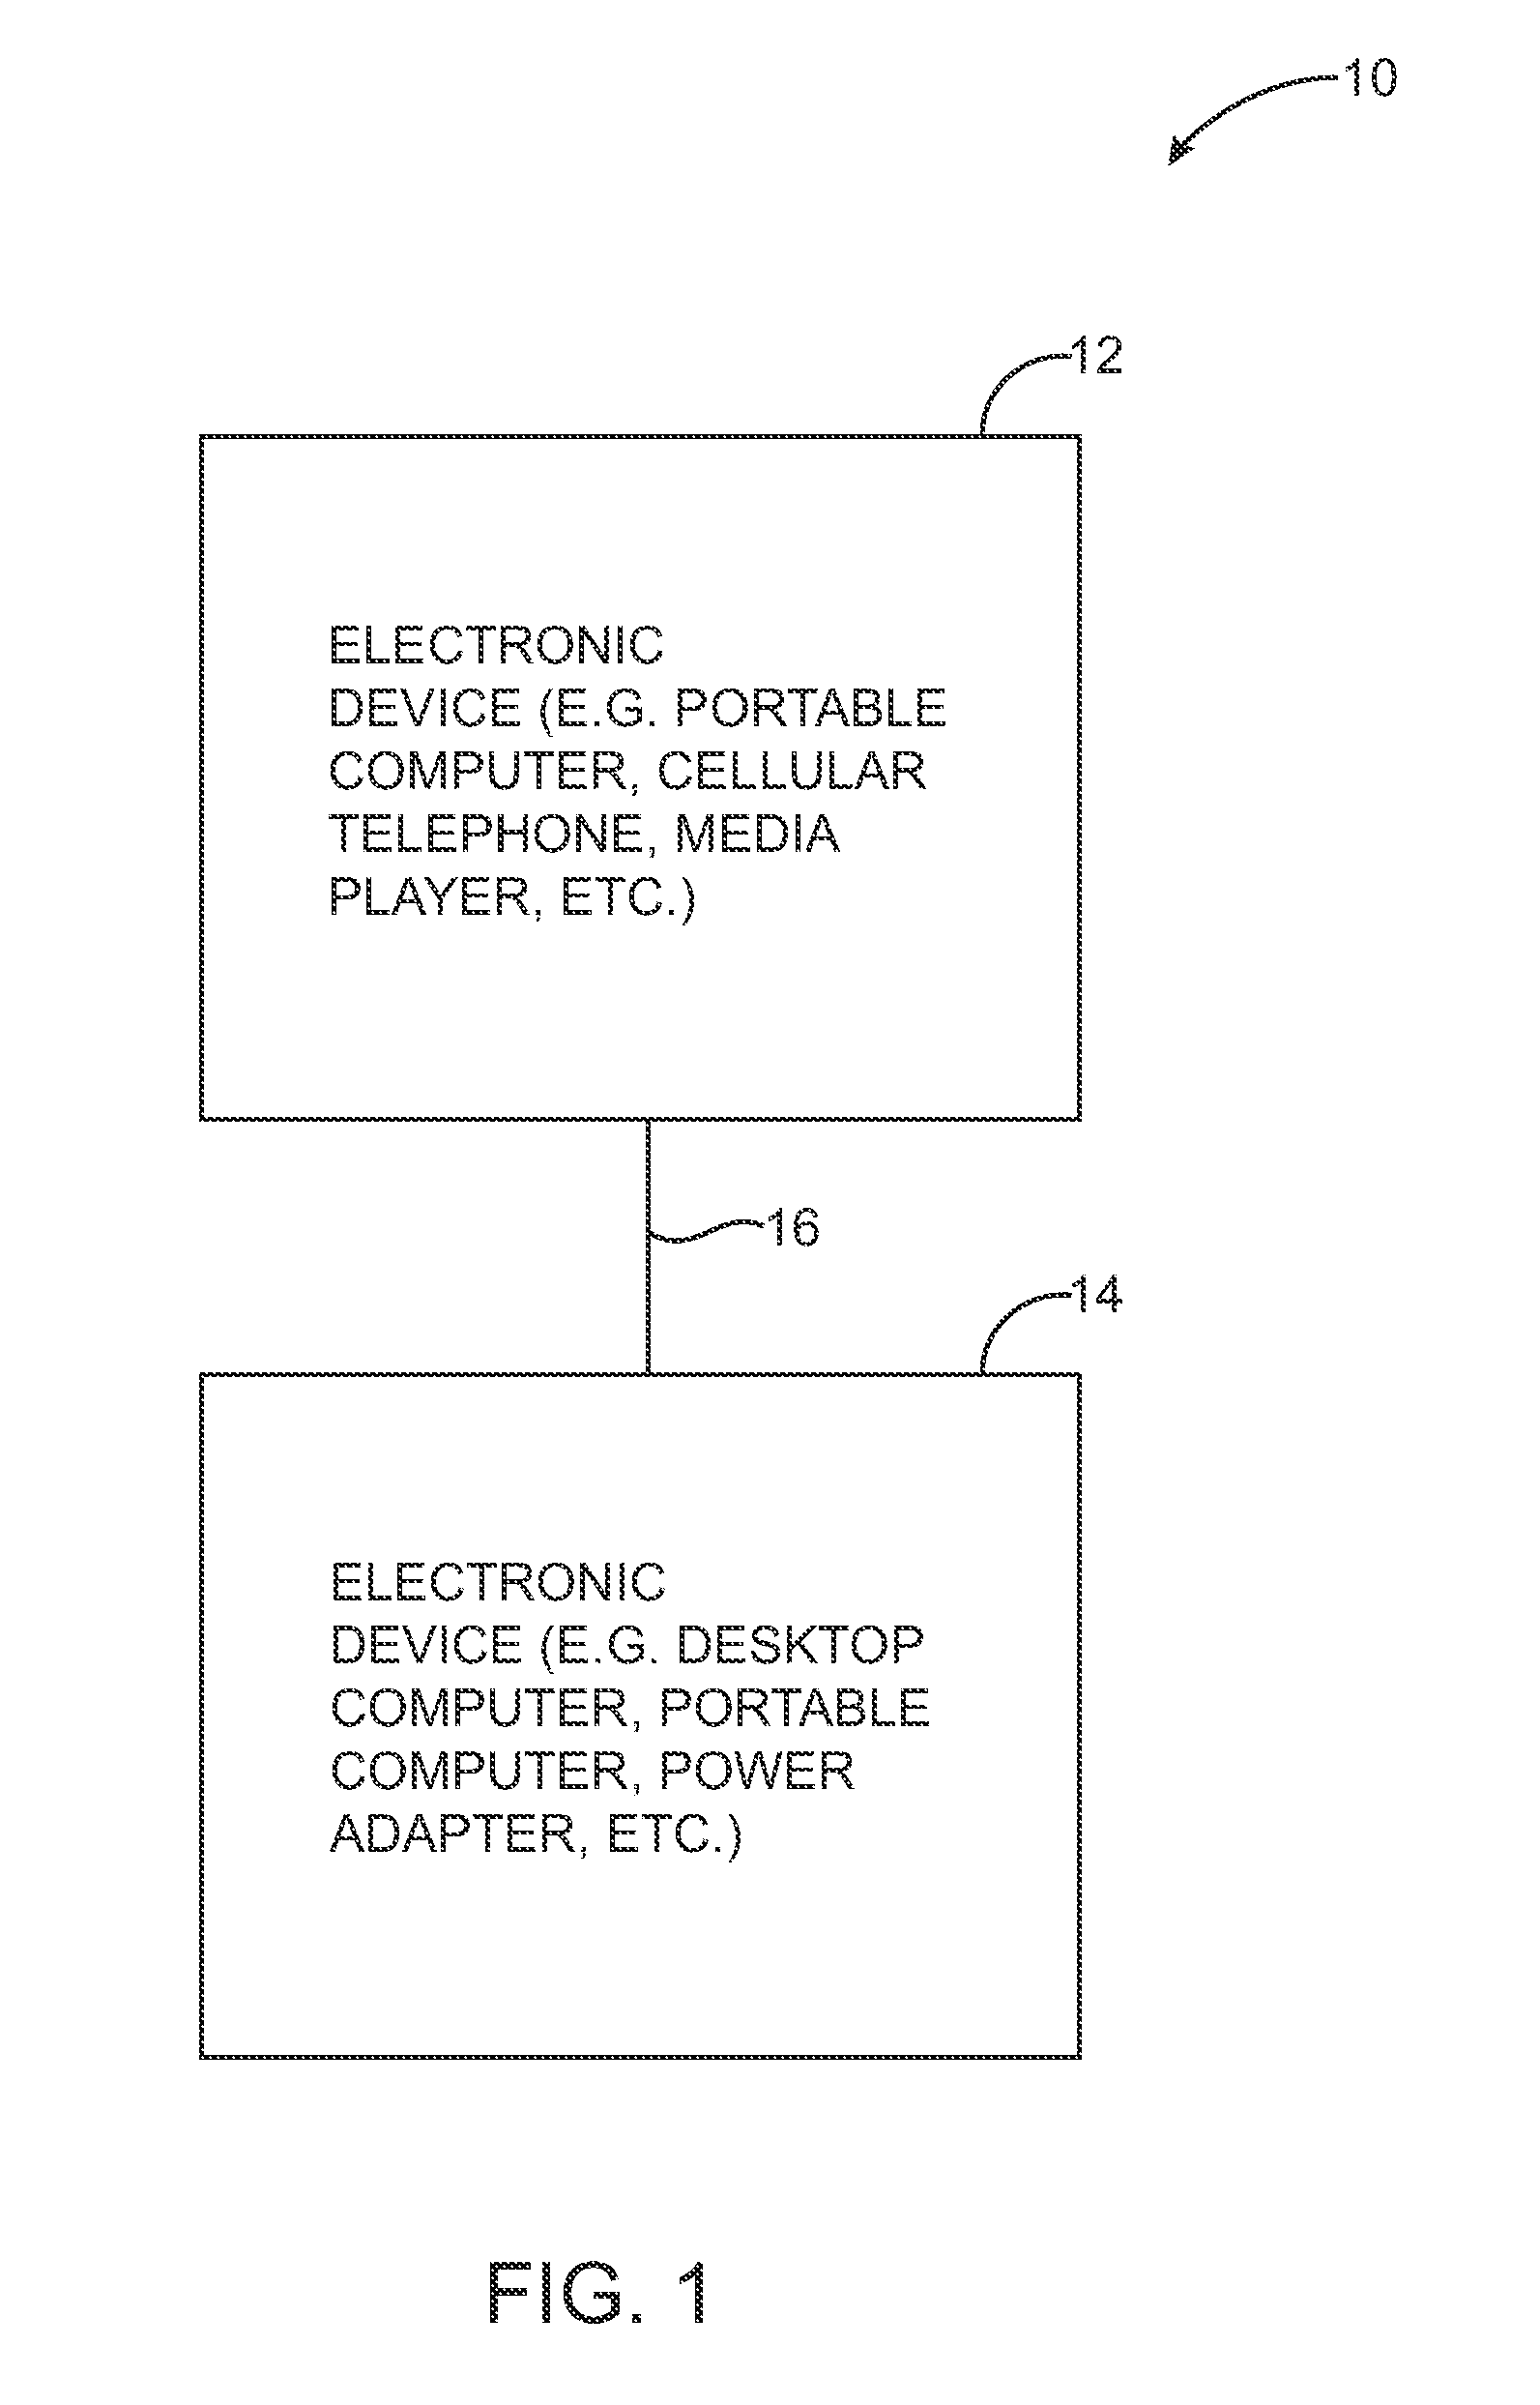 Thermal protection circuits for electronic device cables